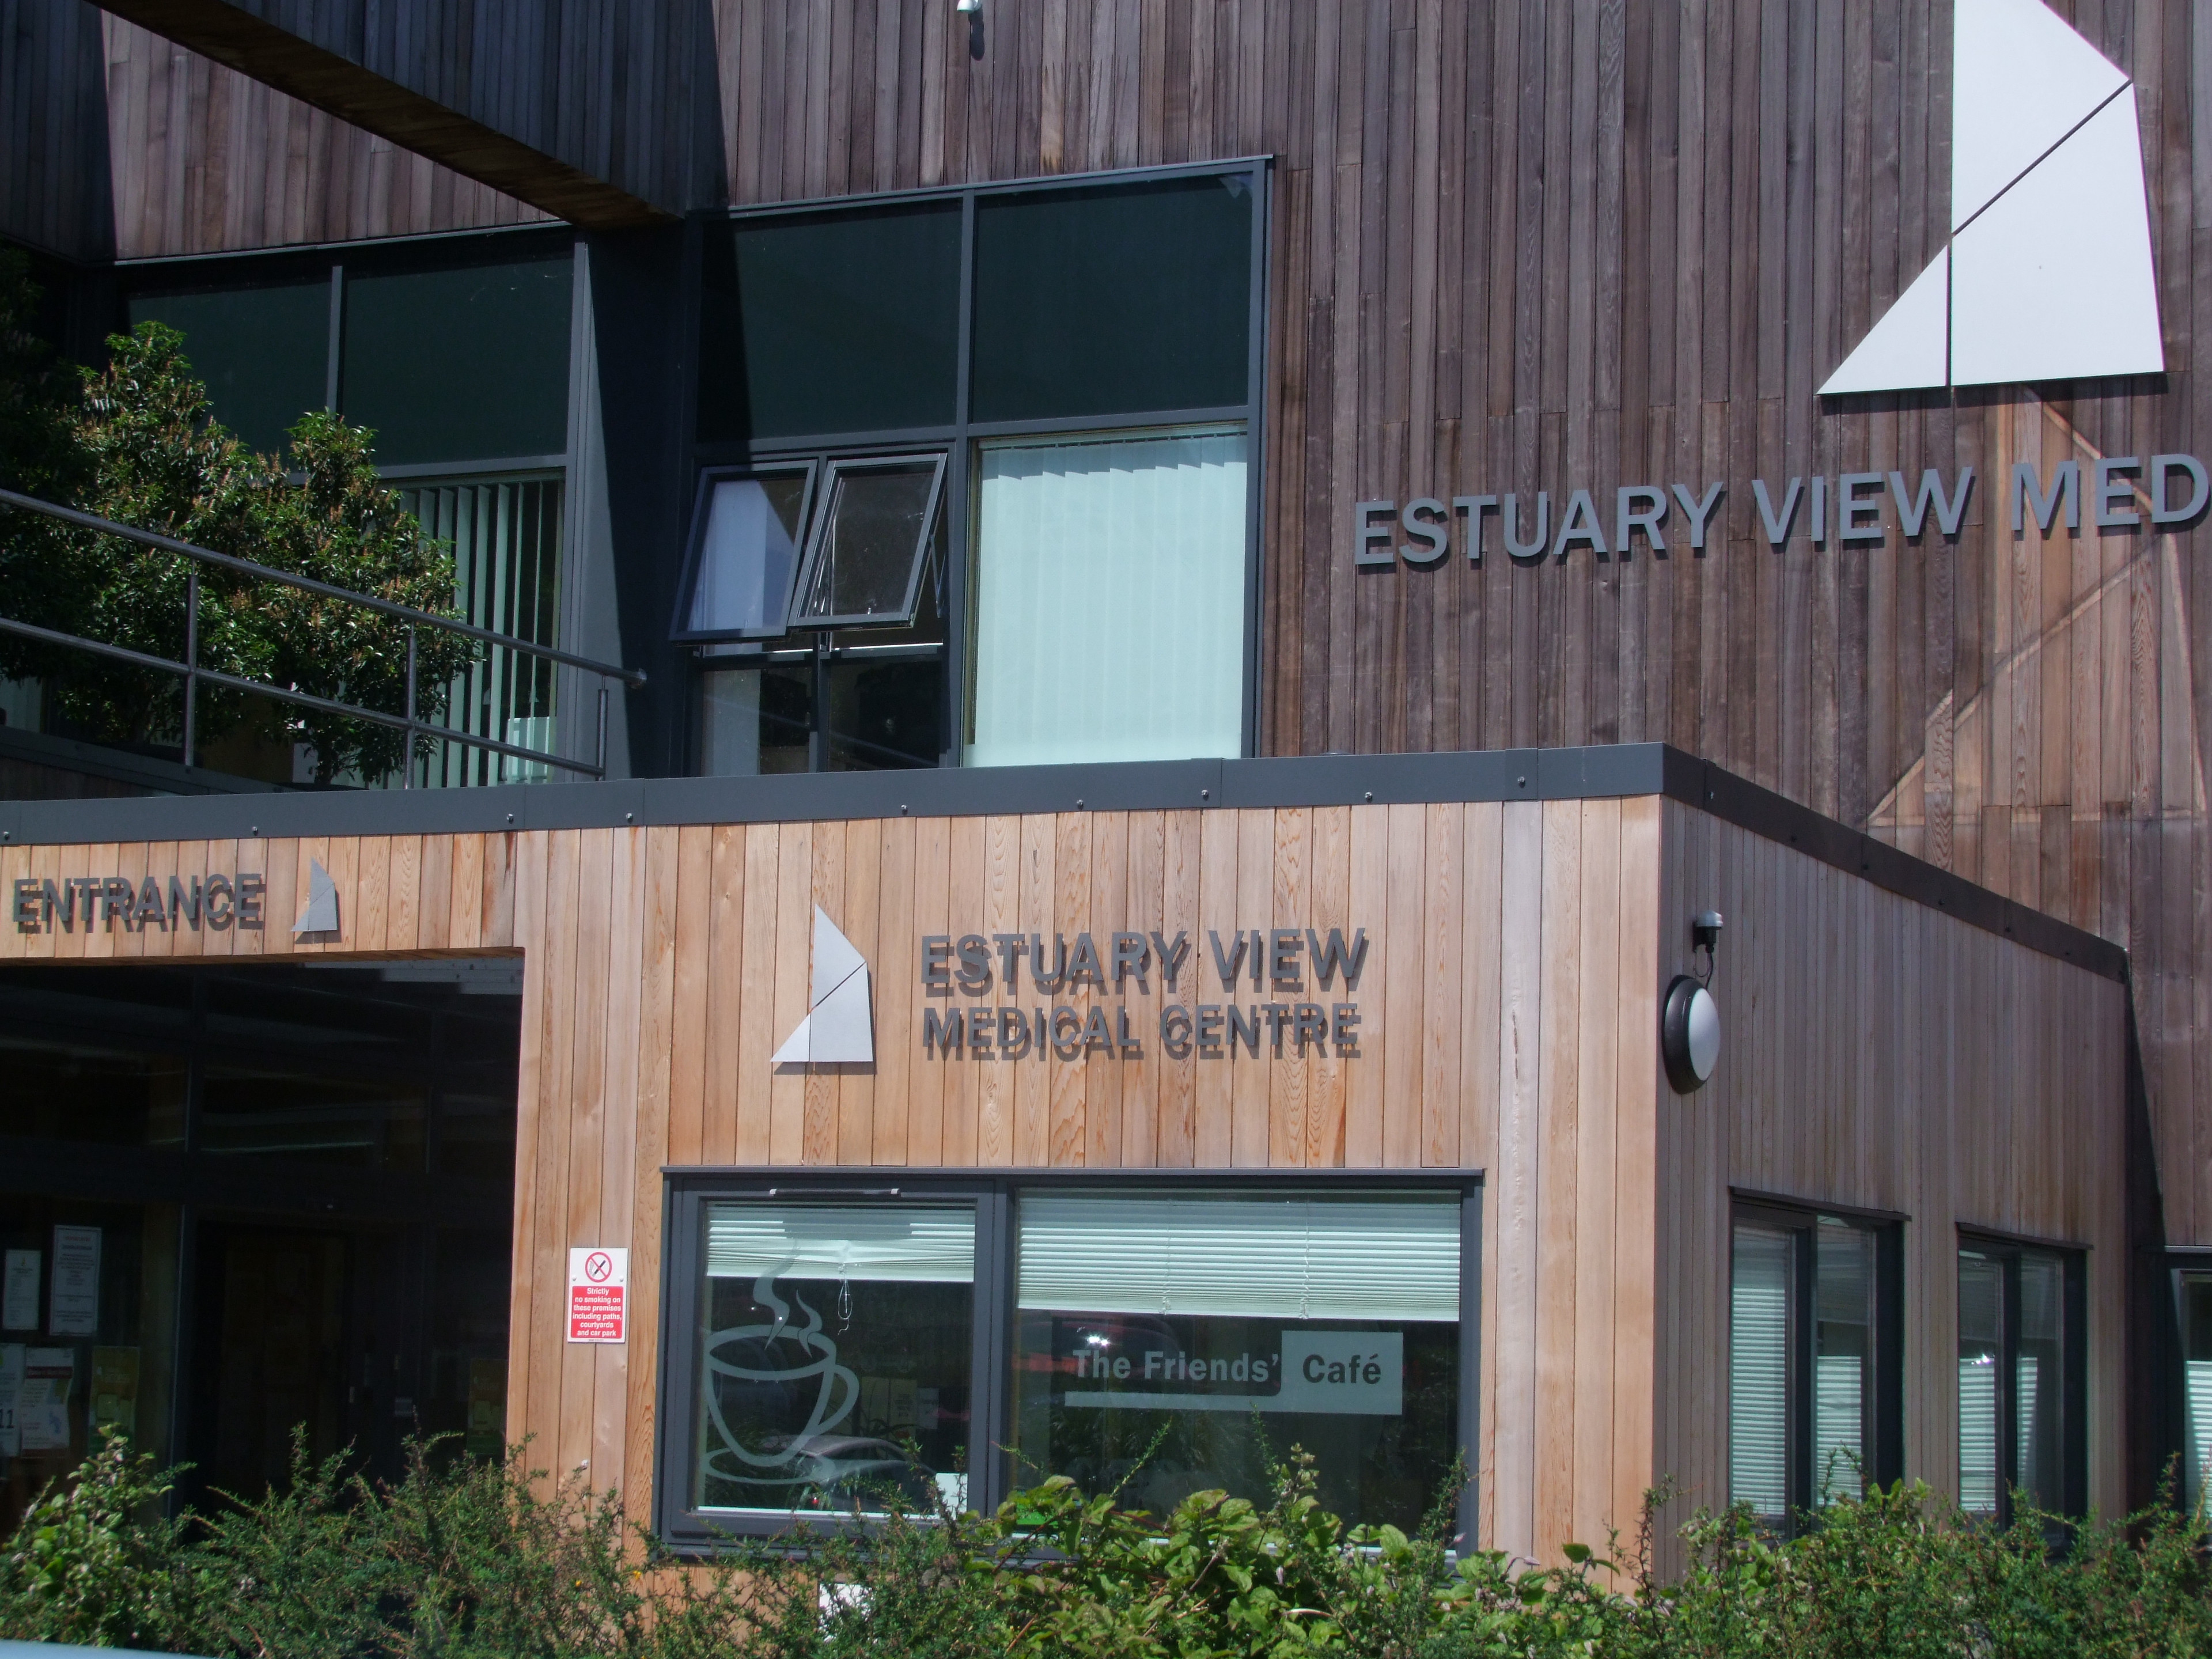 The entrance to Estuary View Medical Centre in Whitstable.